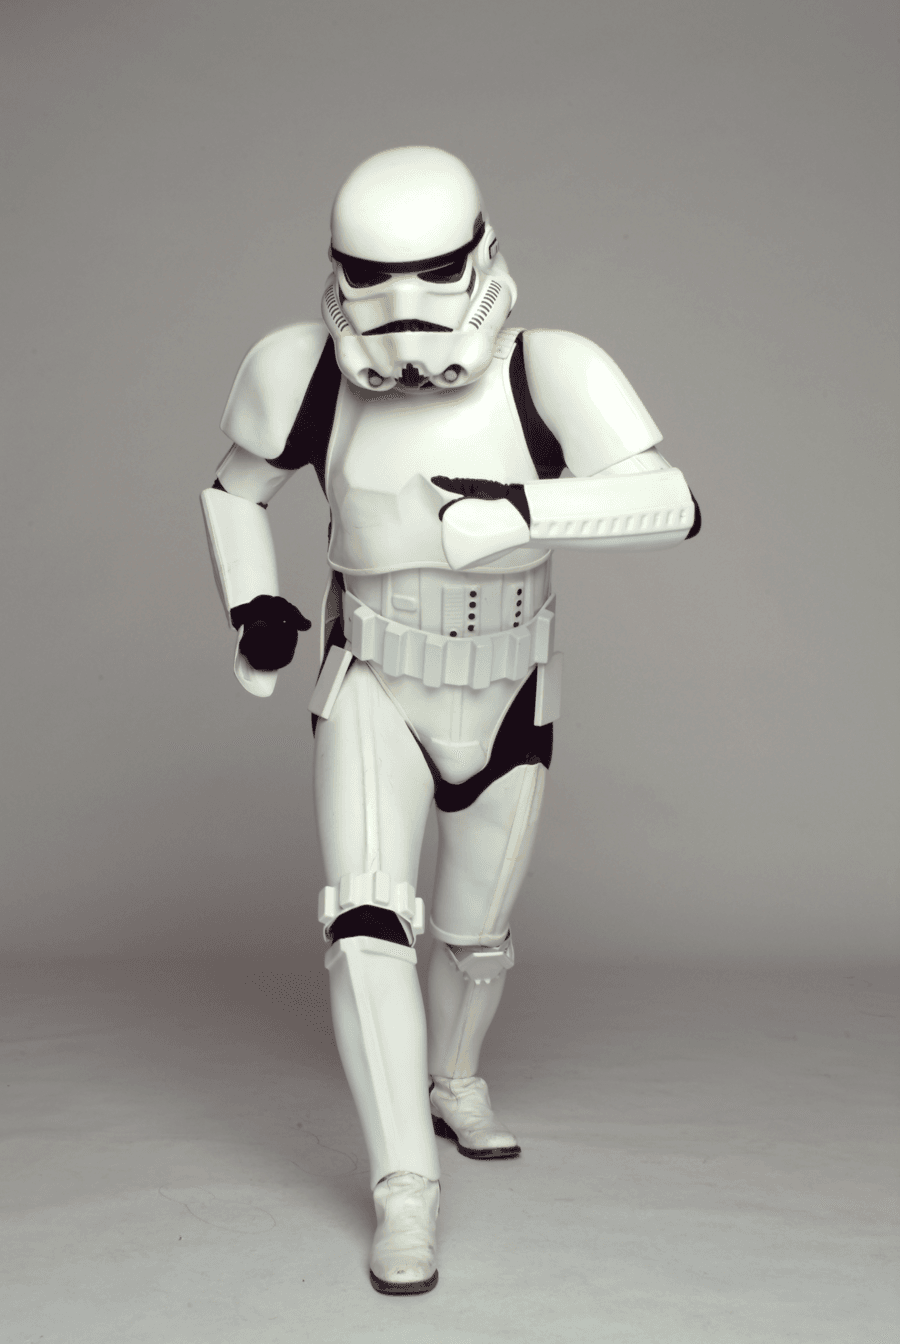 The Stormtrooper costume created by John Mollo.